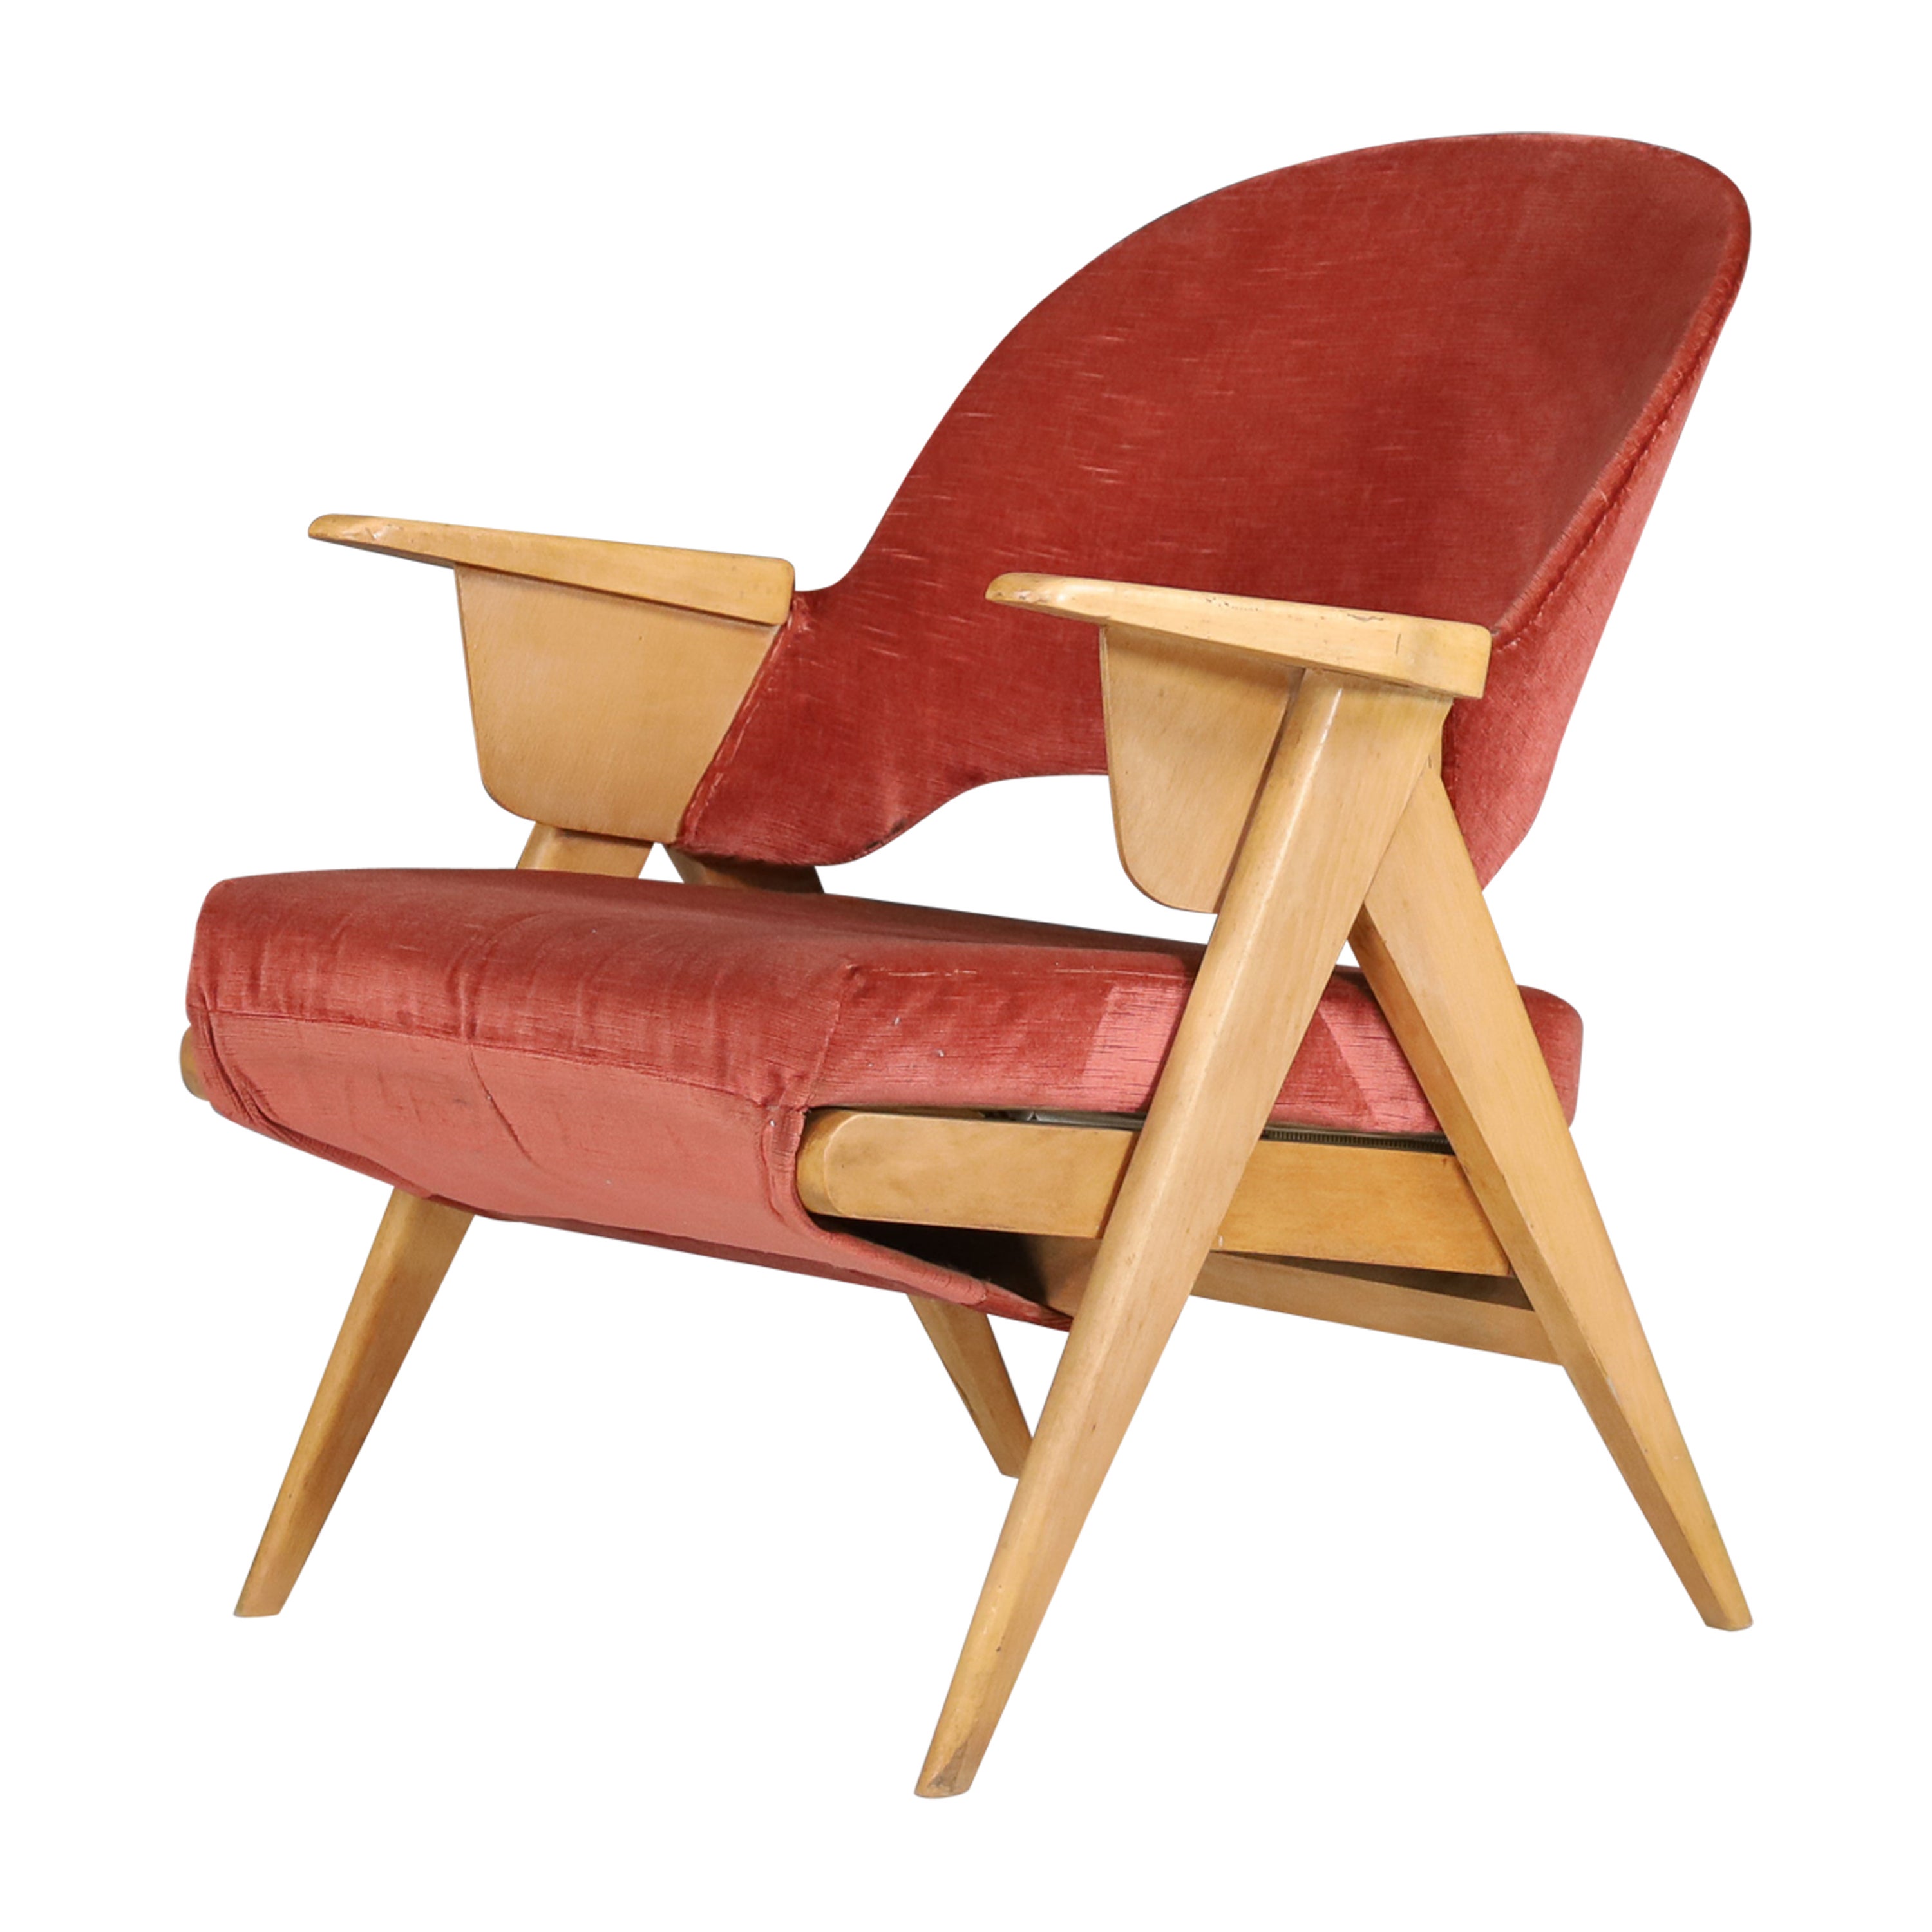 Mid-Century Modern Wood and Original Velvet Lounge Chair made in France, 1950s For Sale